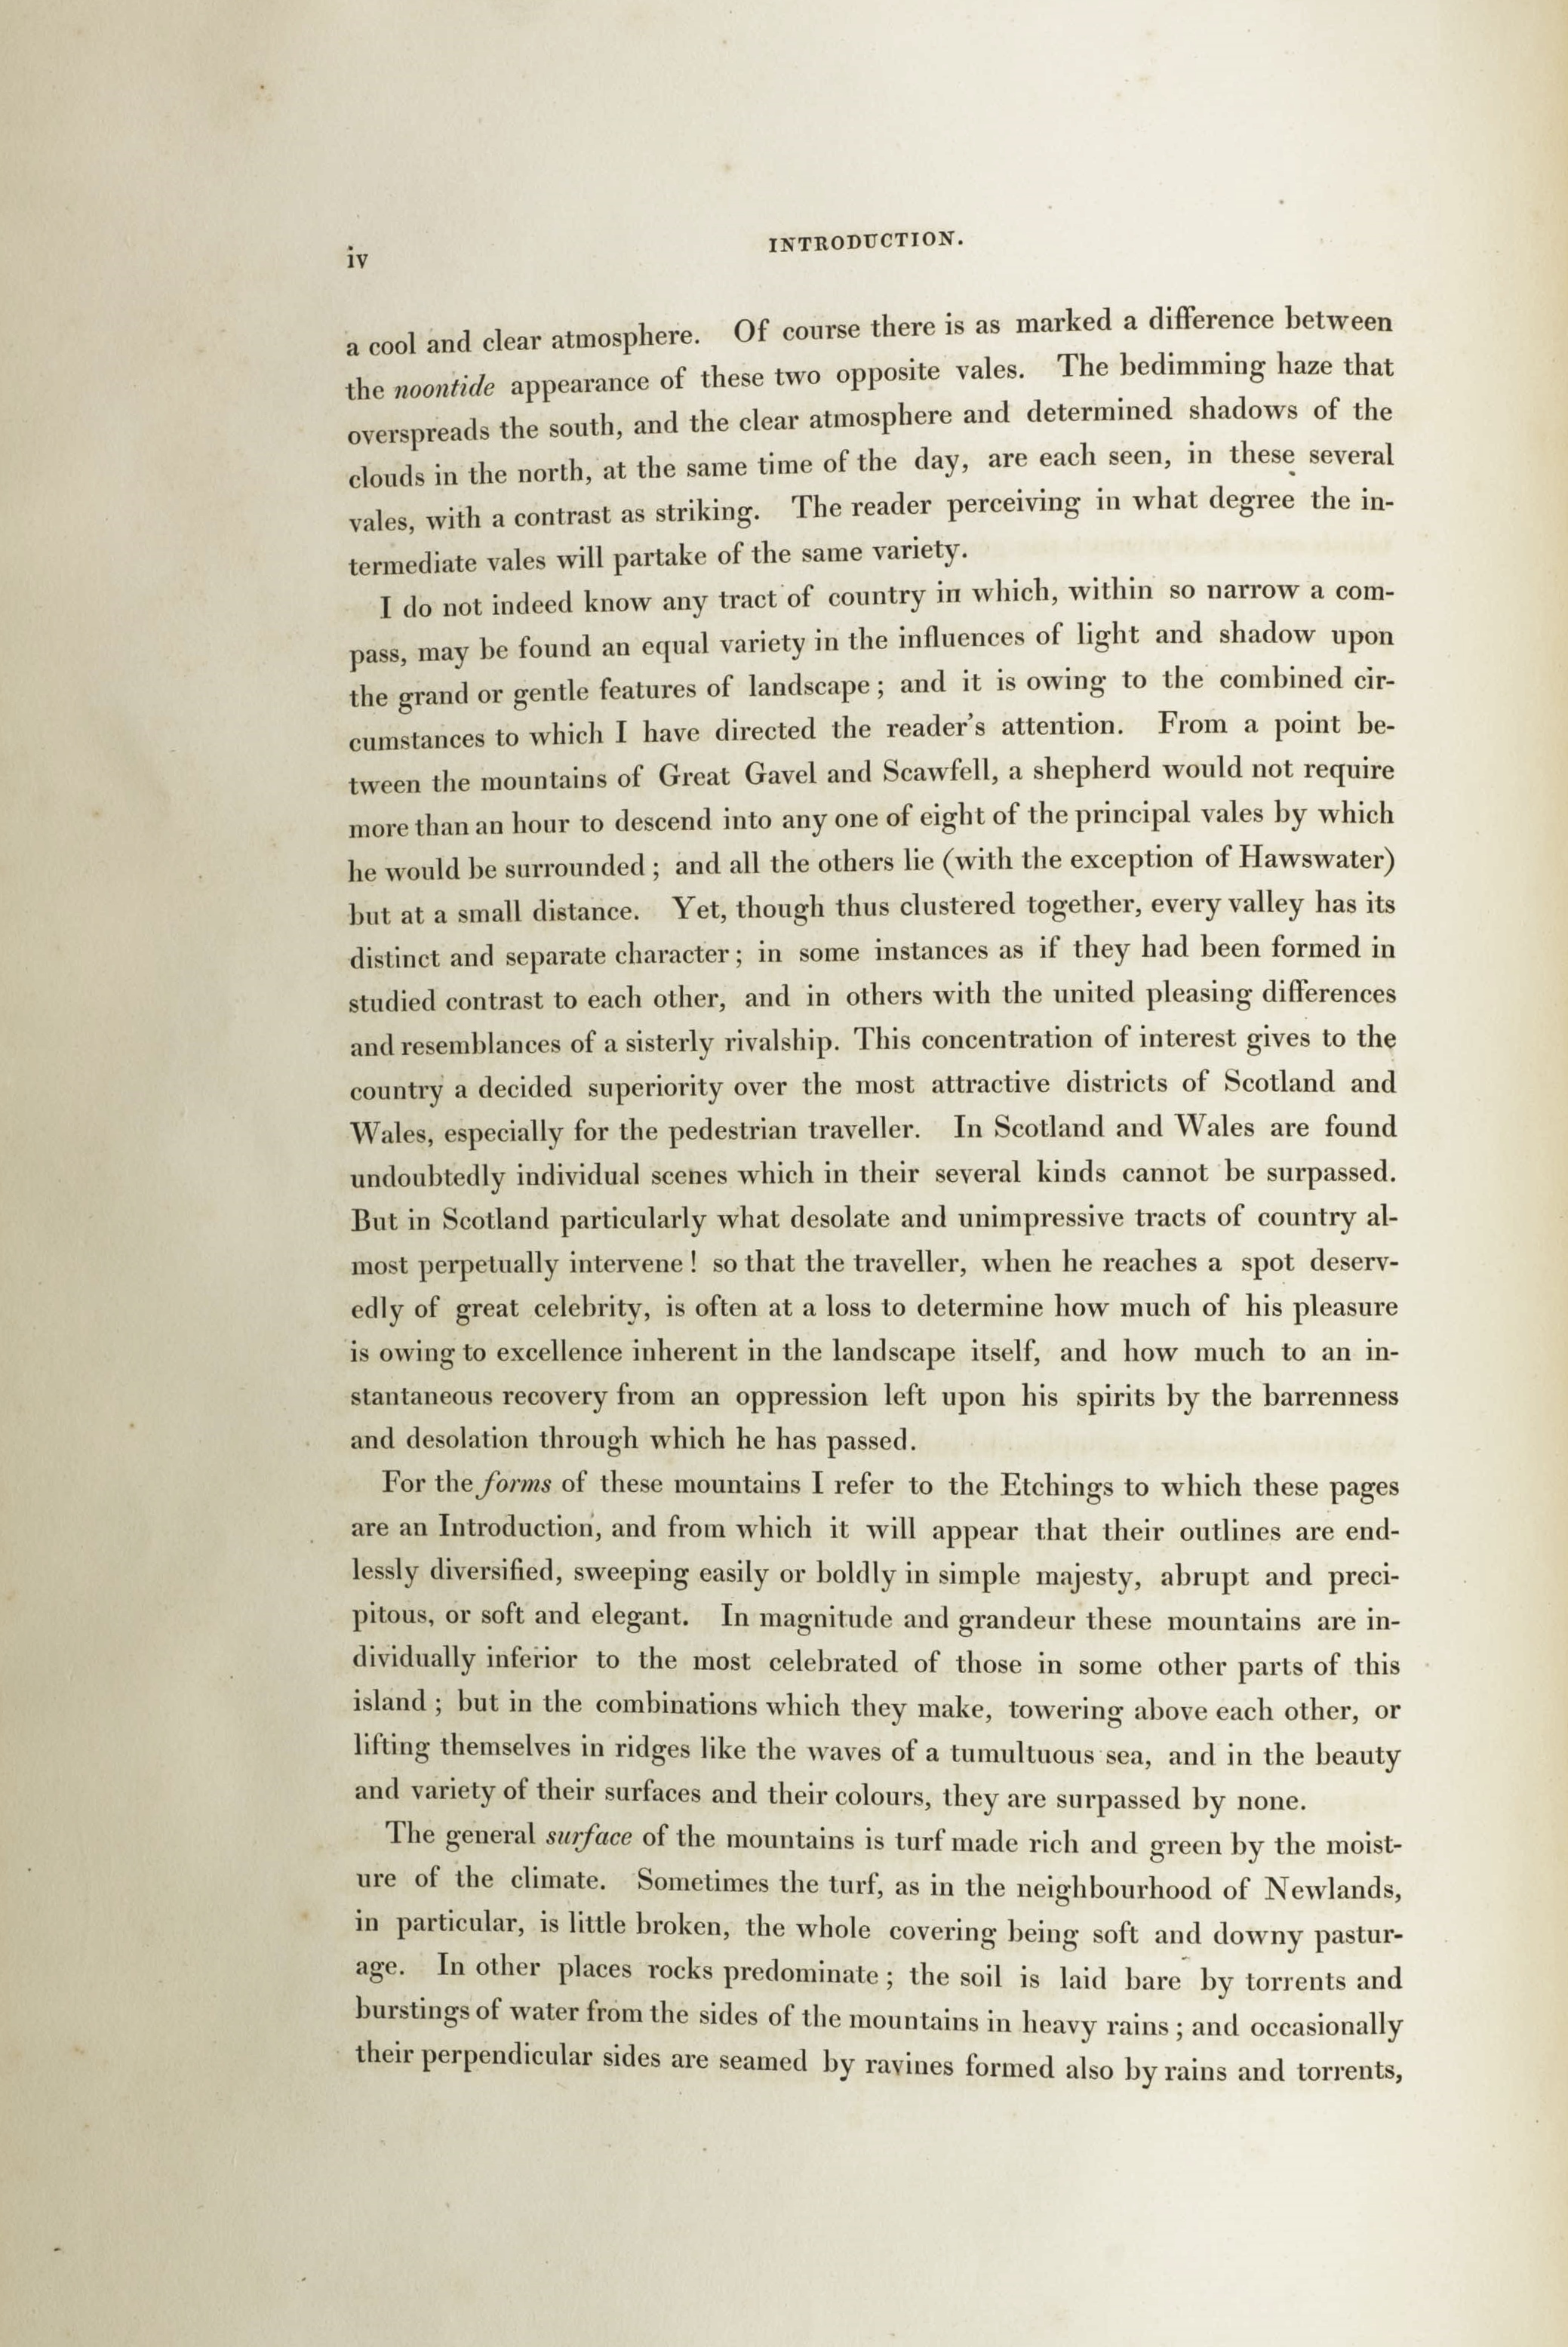 Introduction, page iv